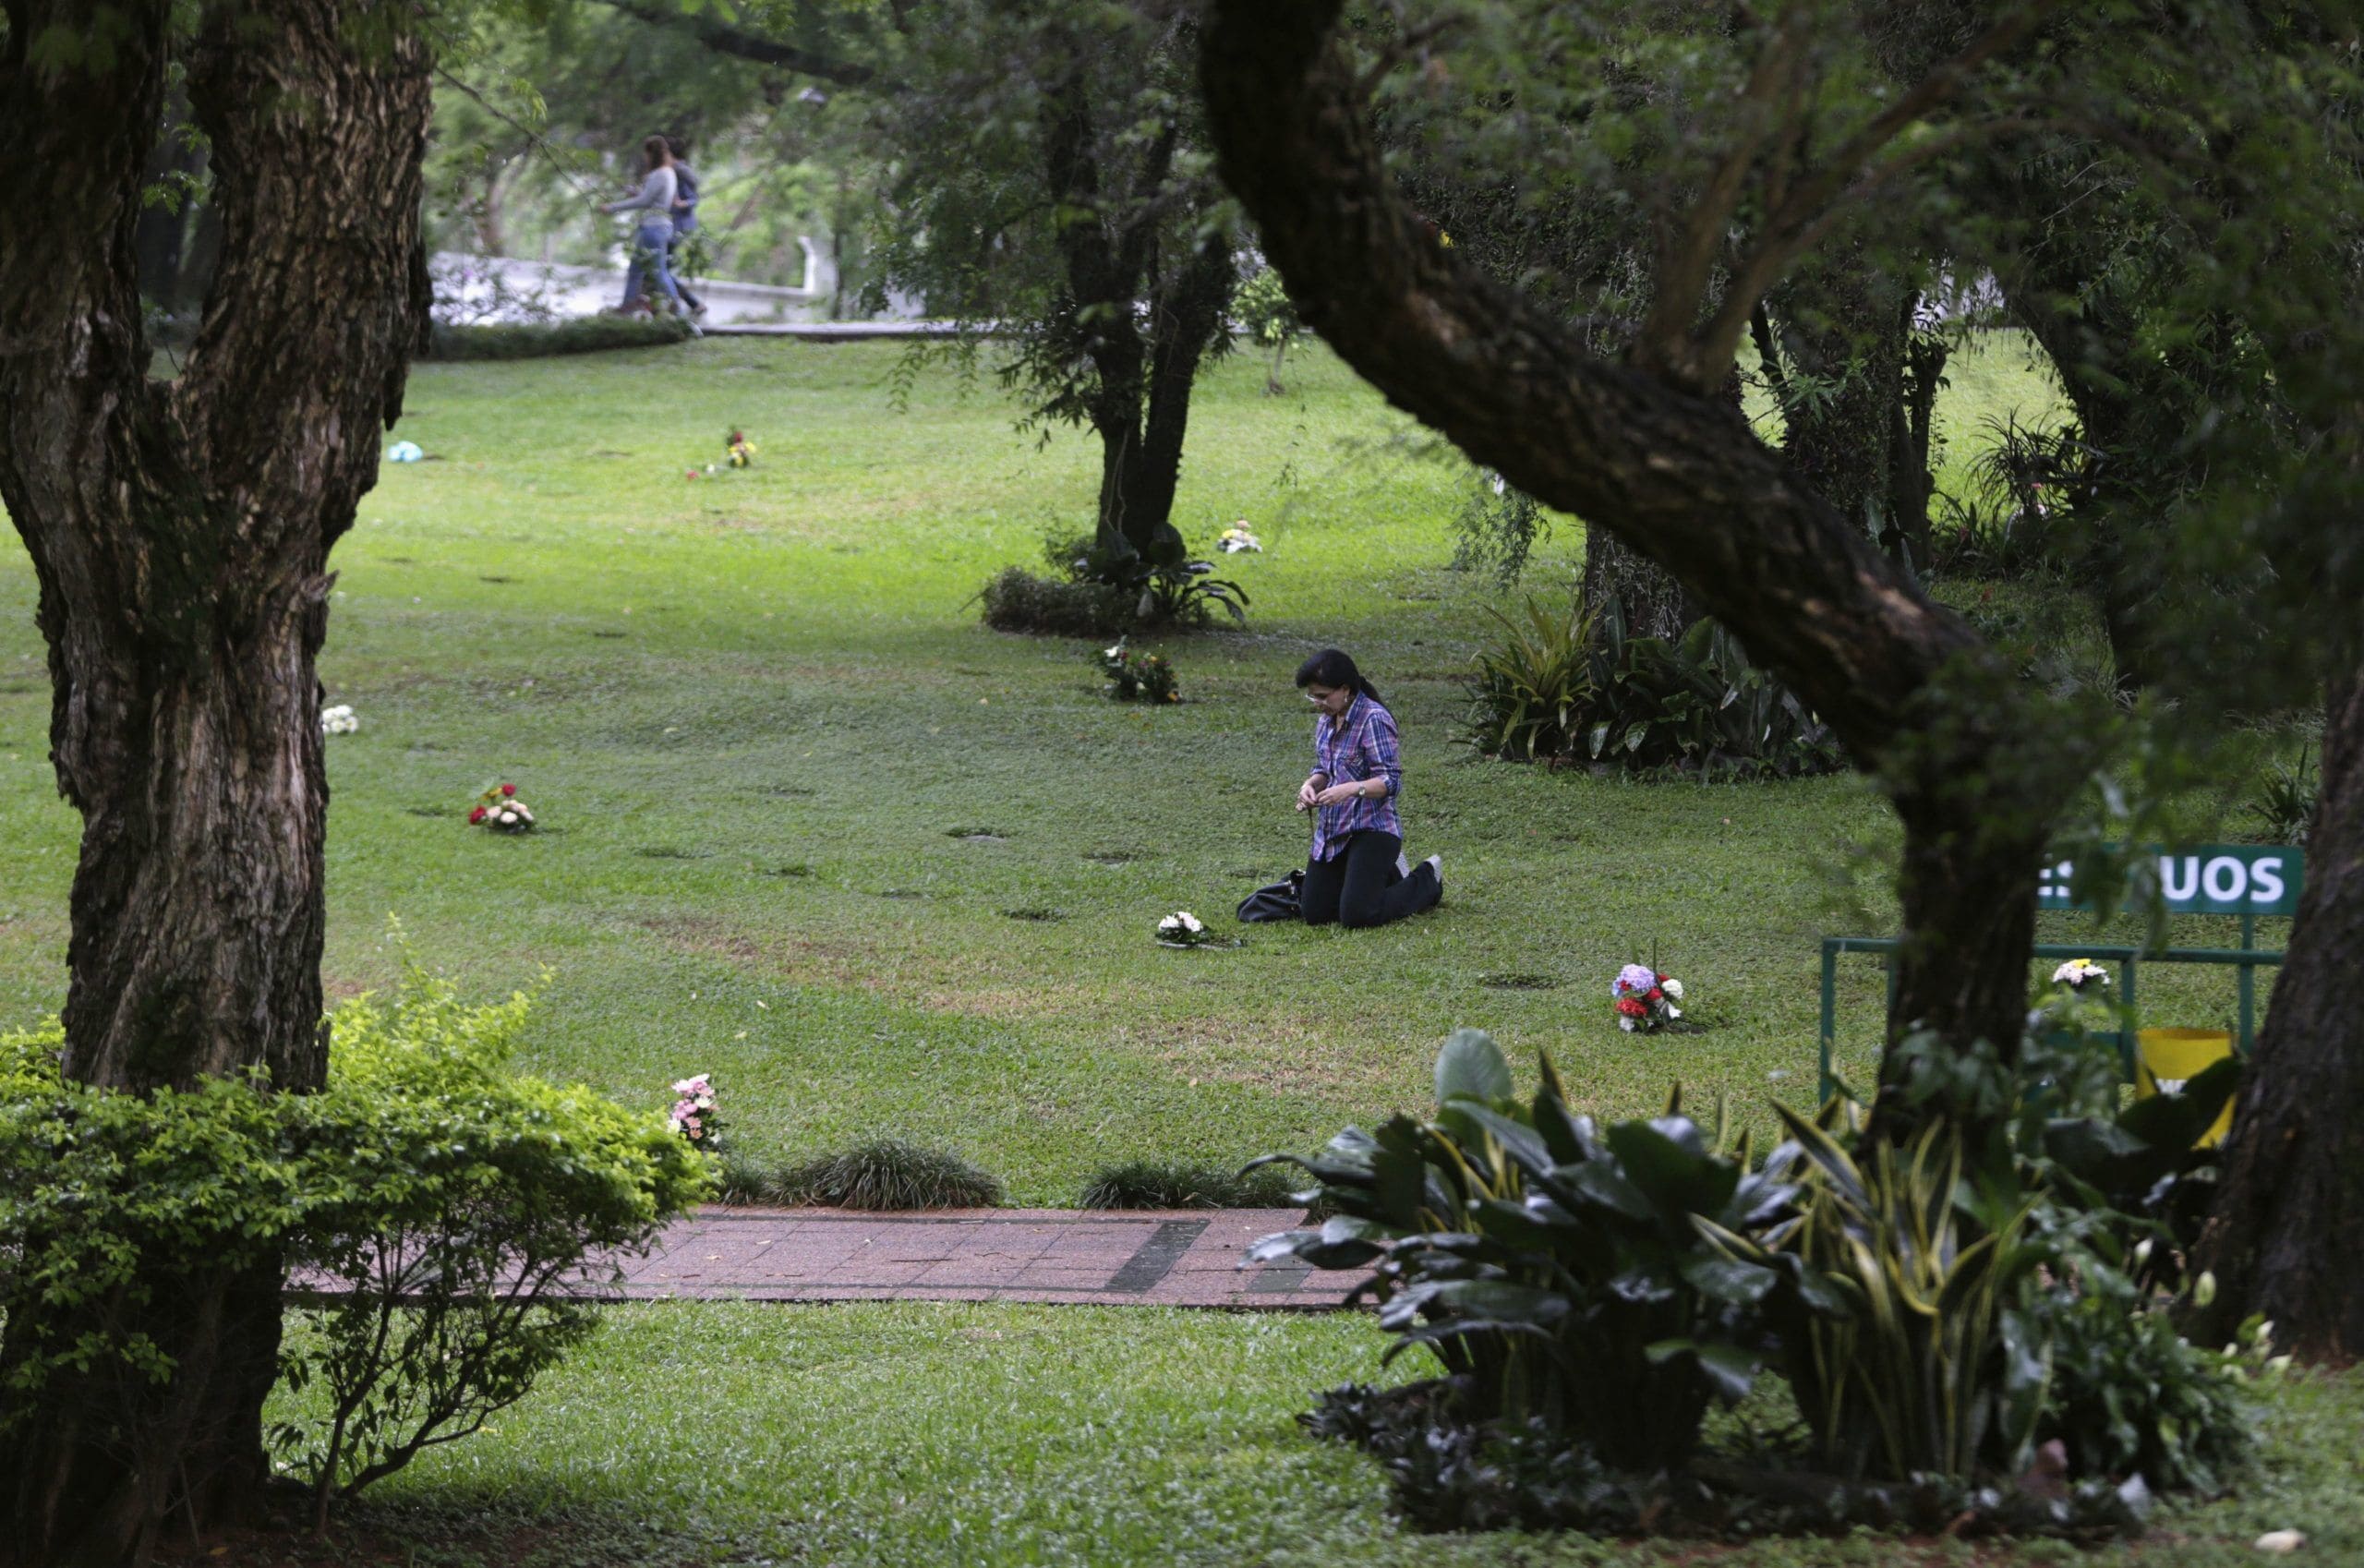 A woman prays at the grave of a relative at a cemetery during the observance of All Souls' Day in Asuncion, Paraguay, in this Nov. 2, 2014, file photo. With the continuing pandemic, the Vatican has again extended throughout all of November the opportunity to receive a plenary indulgence for visiting a cemetery to pray for the dead. (CNS photo/Jorge Adorno, Reuters)